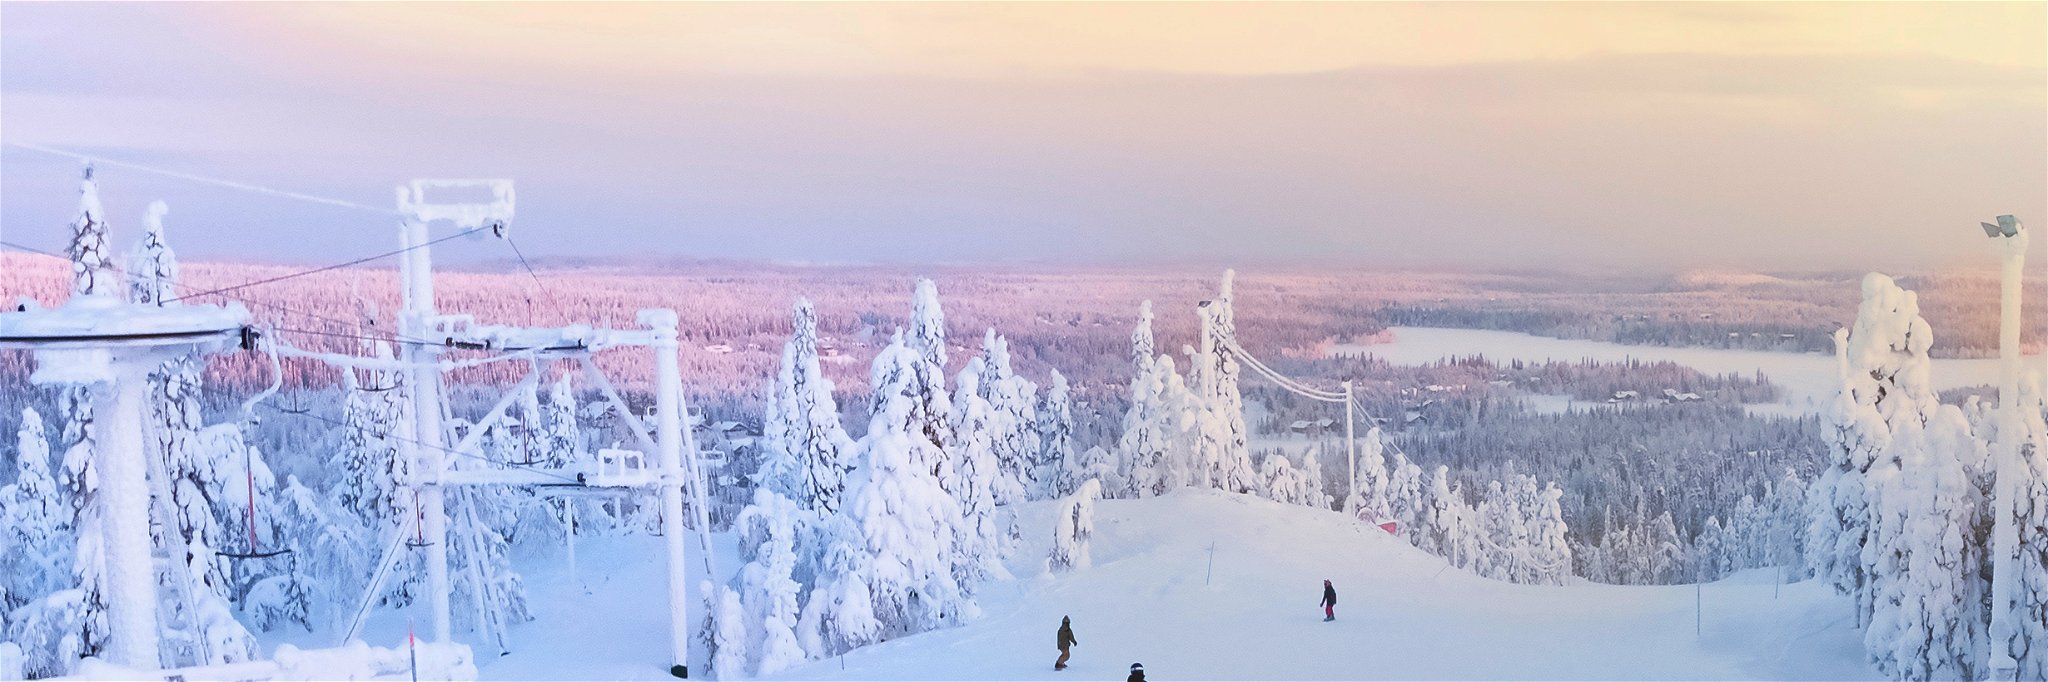 Sunrise over the snow-covered forest at Ruka, Finland.